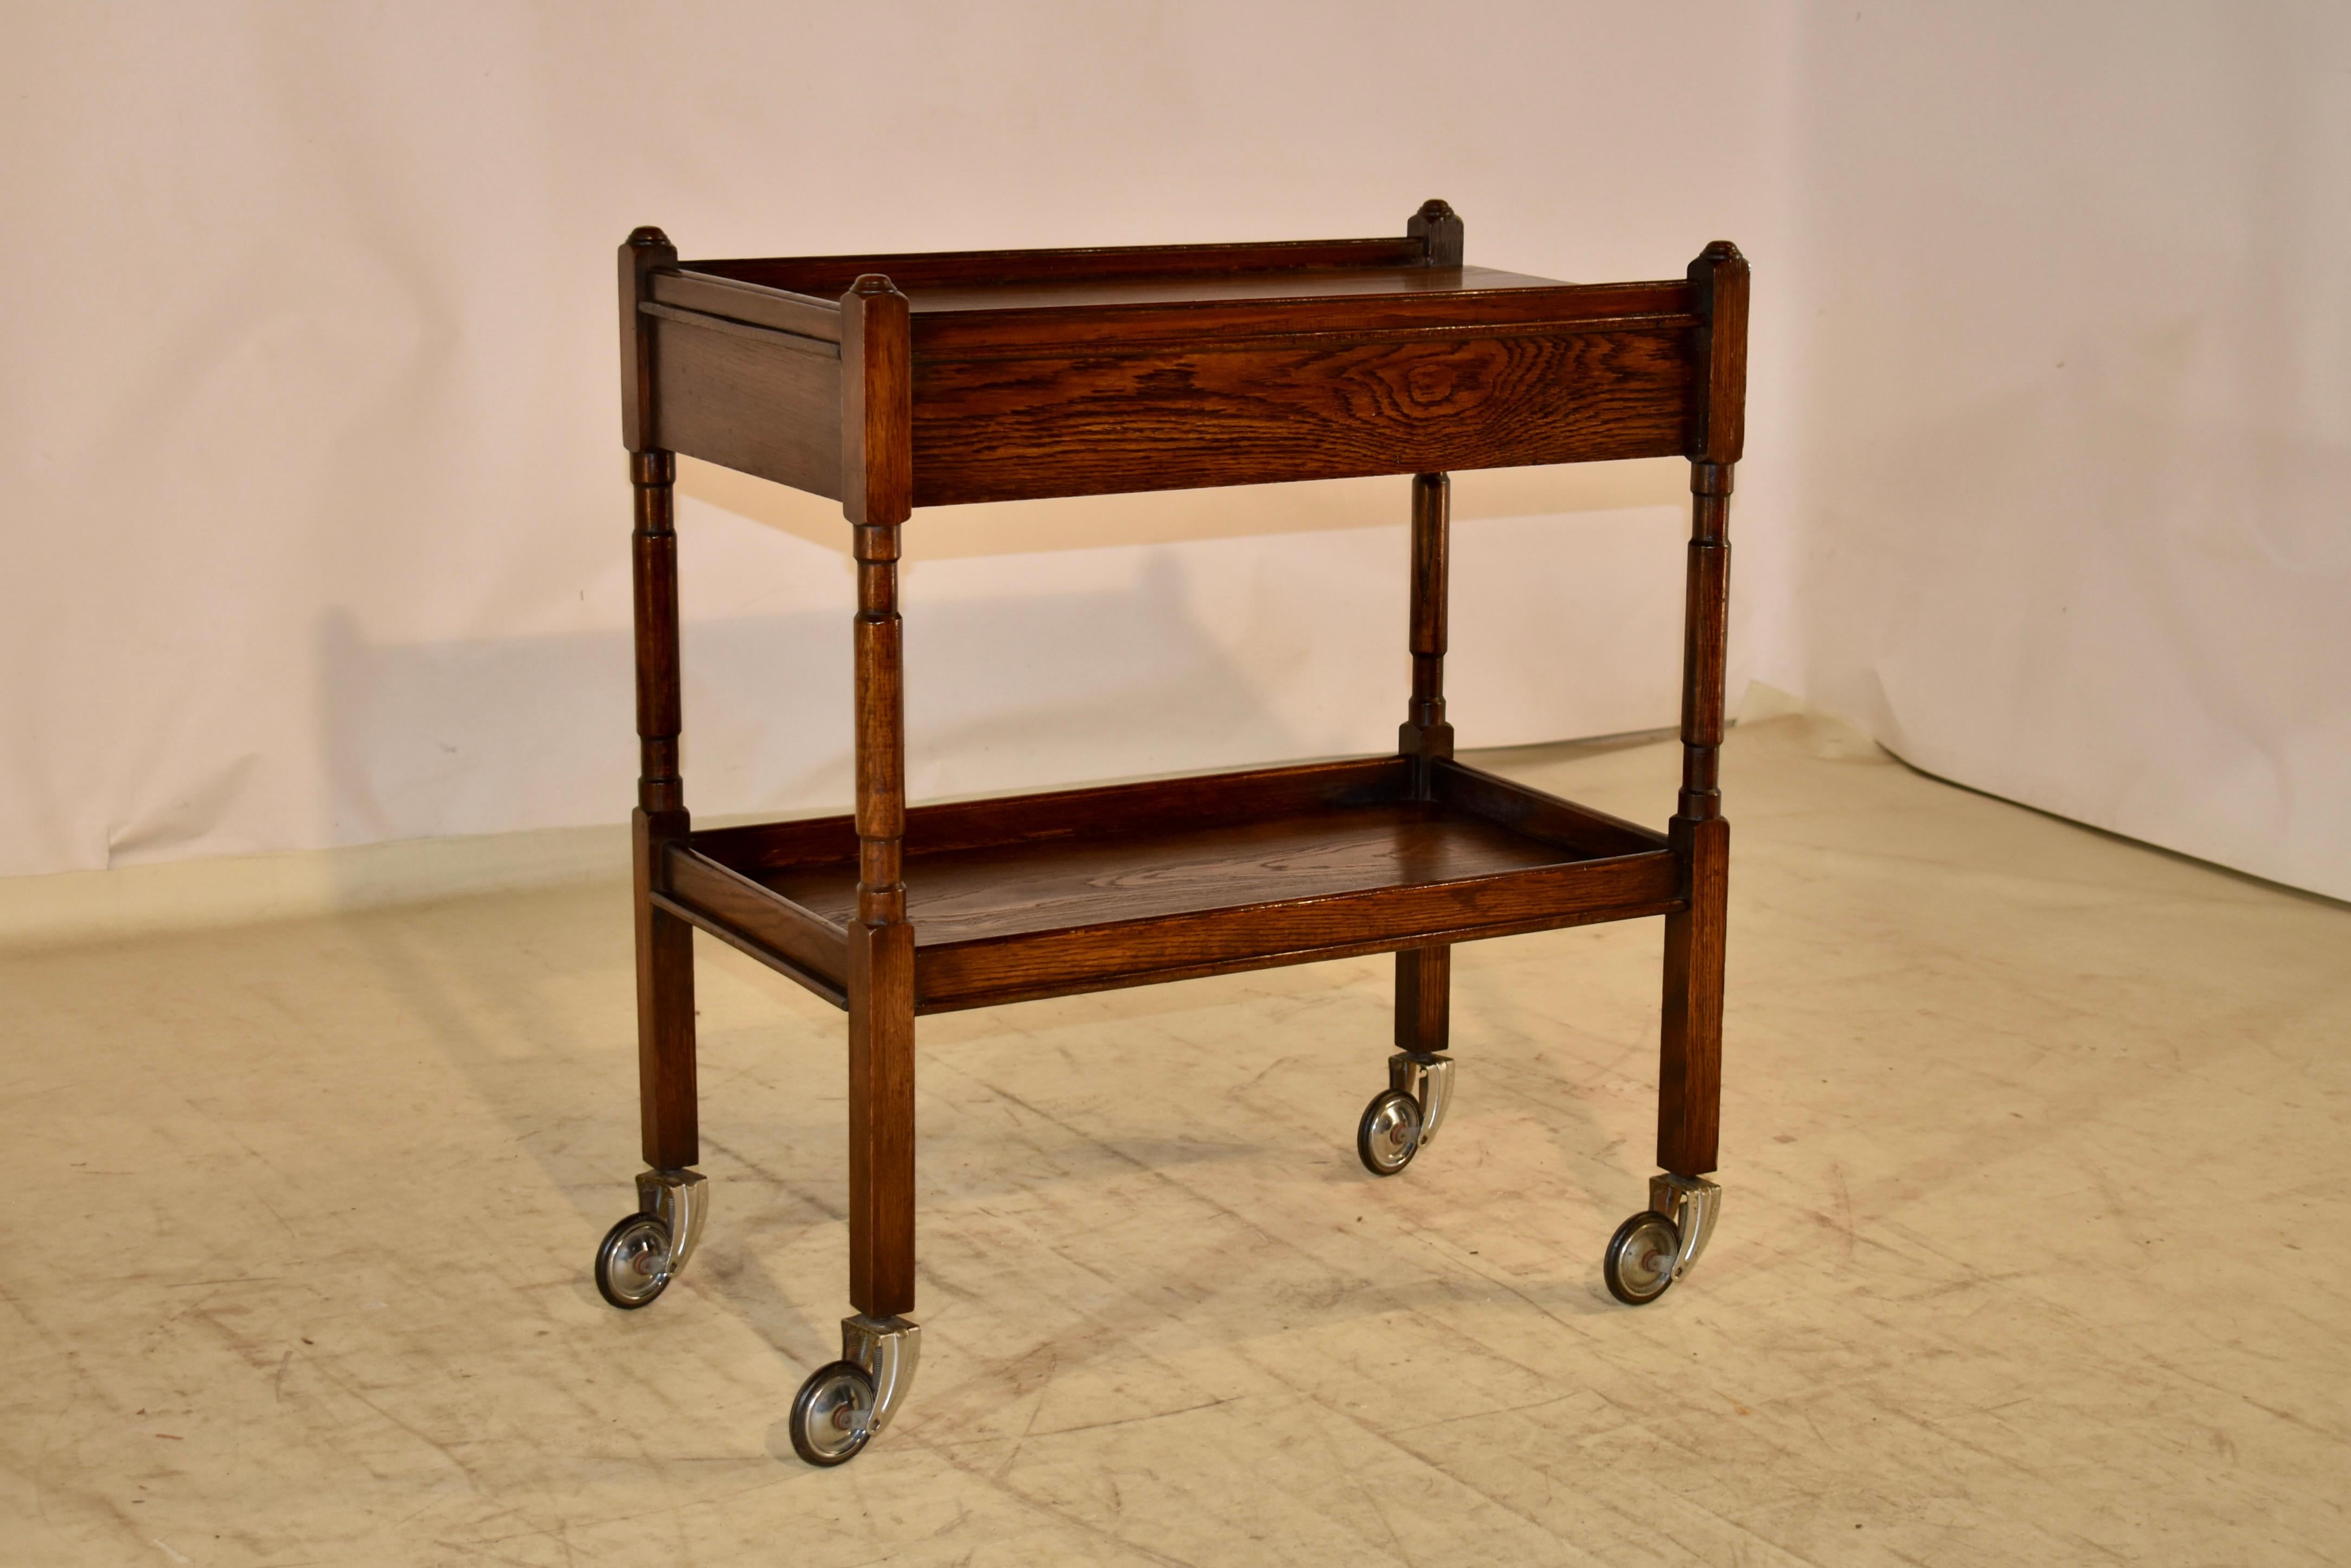 Edwardian oak drink cart from England, circa 1900-1910.  There is a single drawer in the top of the cart, which is a nice addition, and a more unusual feature to find in drink carts.  The top and lower shelf have galleries surrounding the shelves.